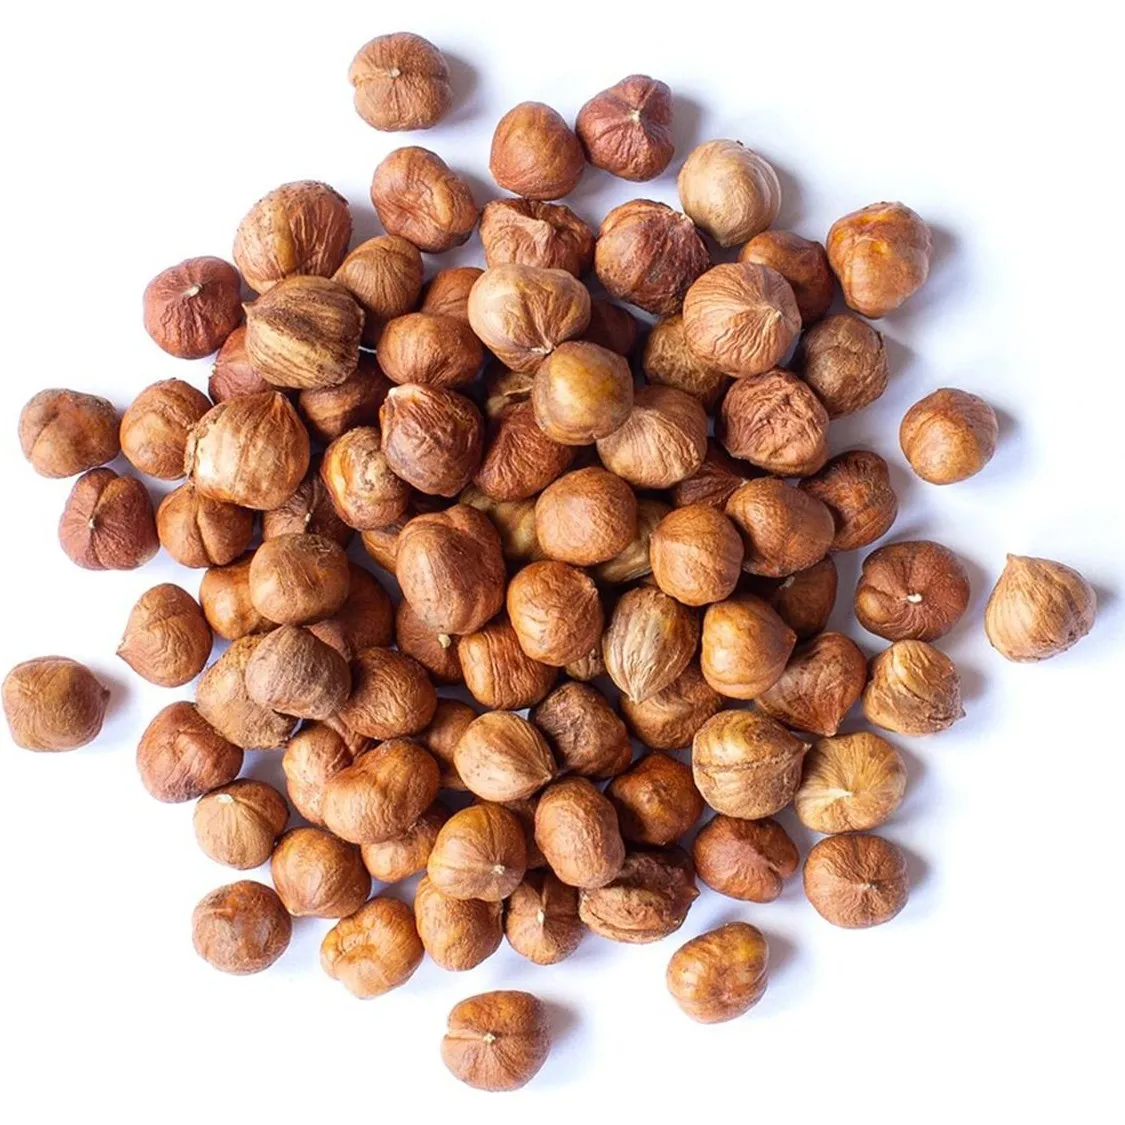 Buy roasted hazelnuts Woolworths + great price with guaranteed quality